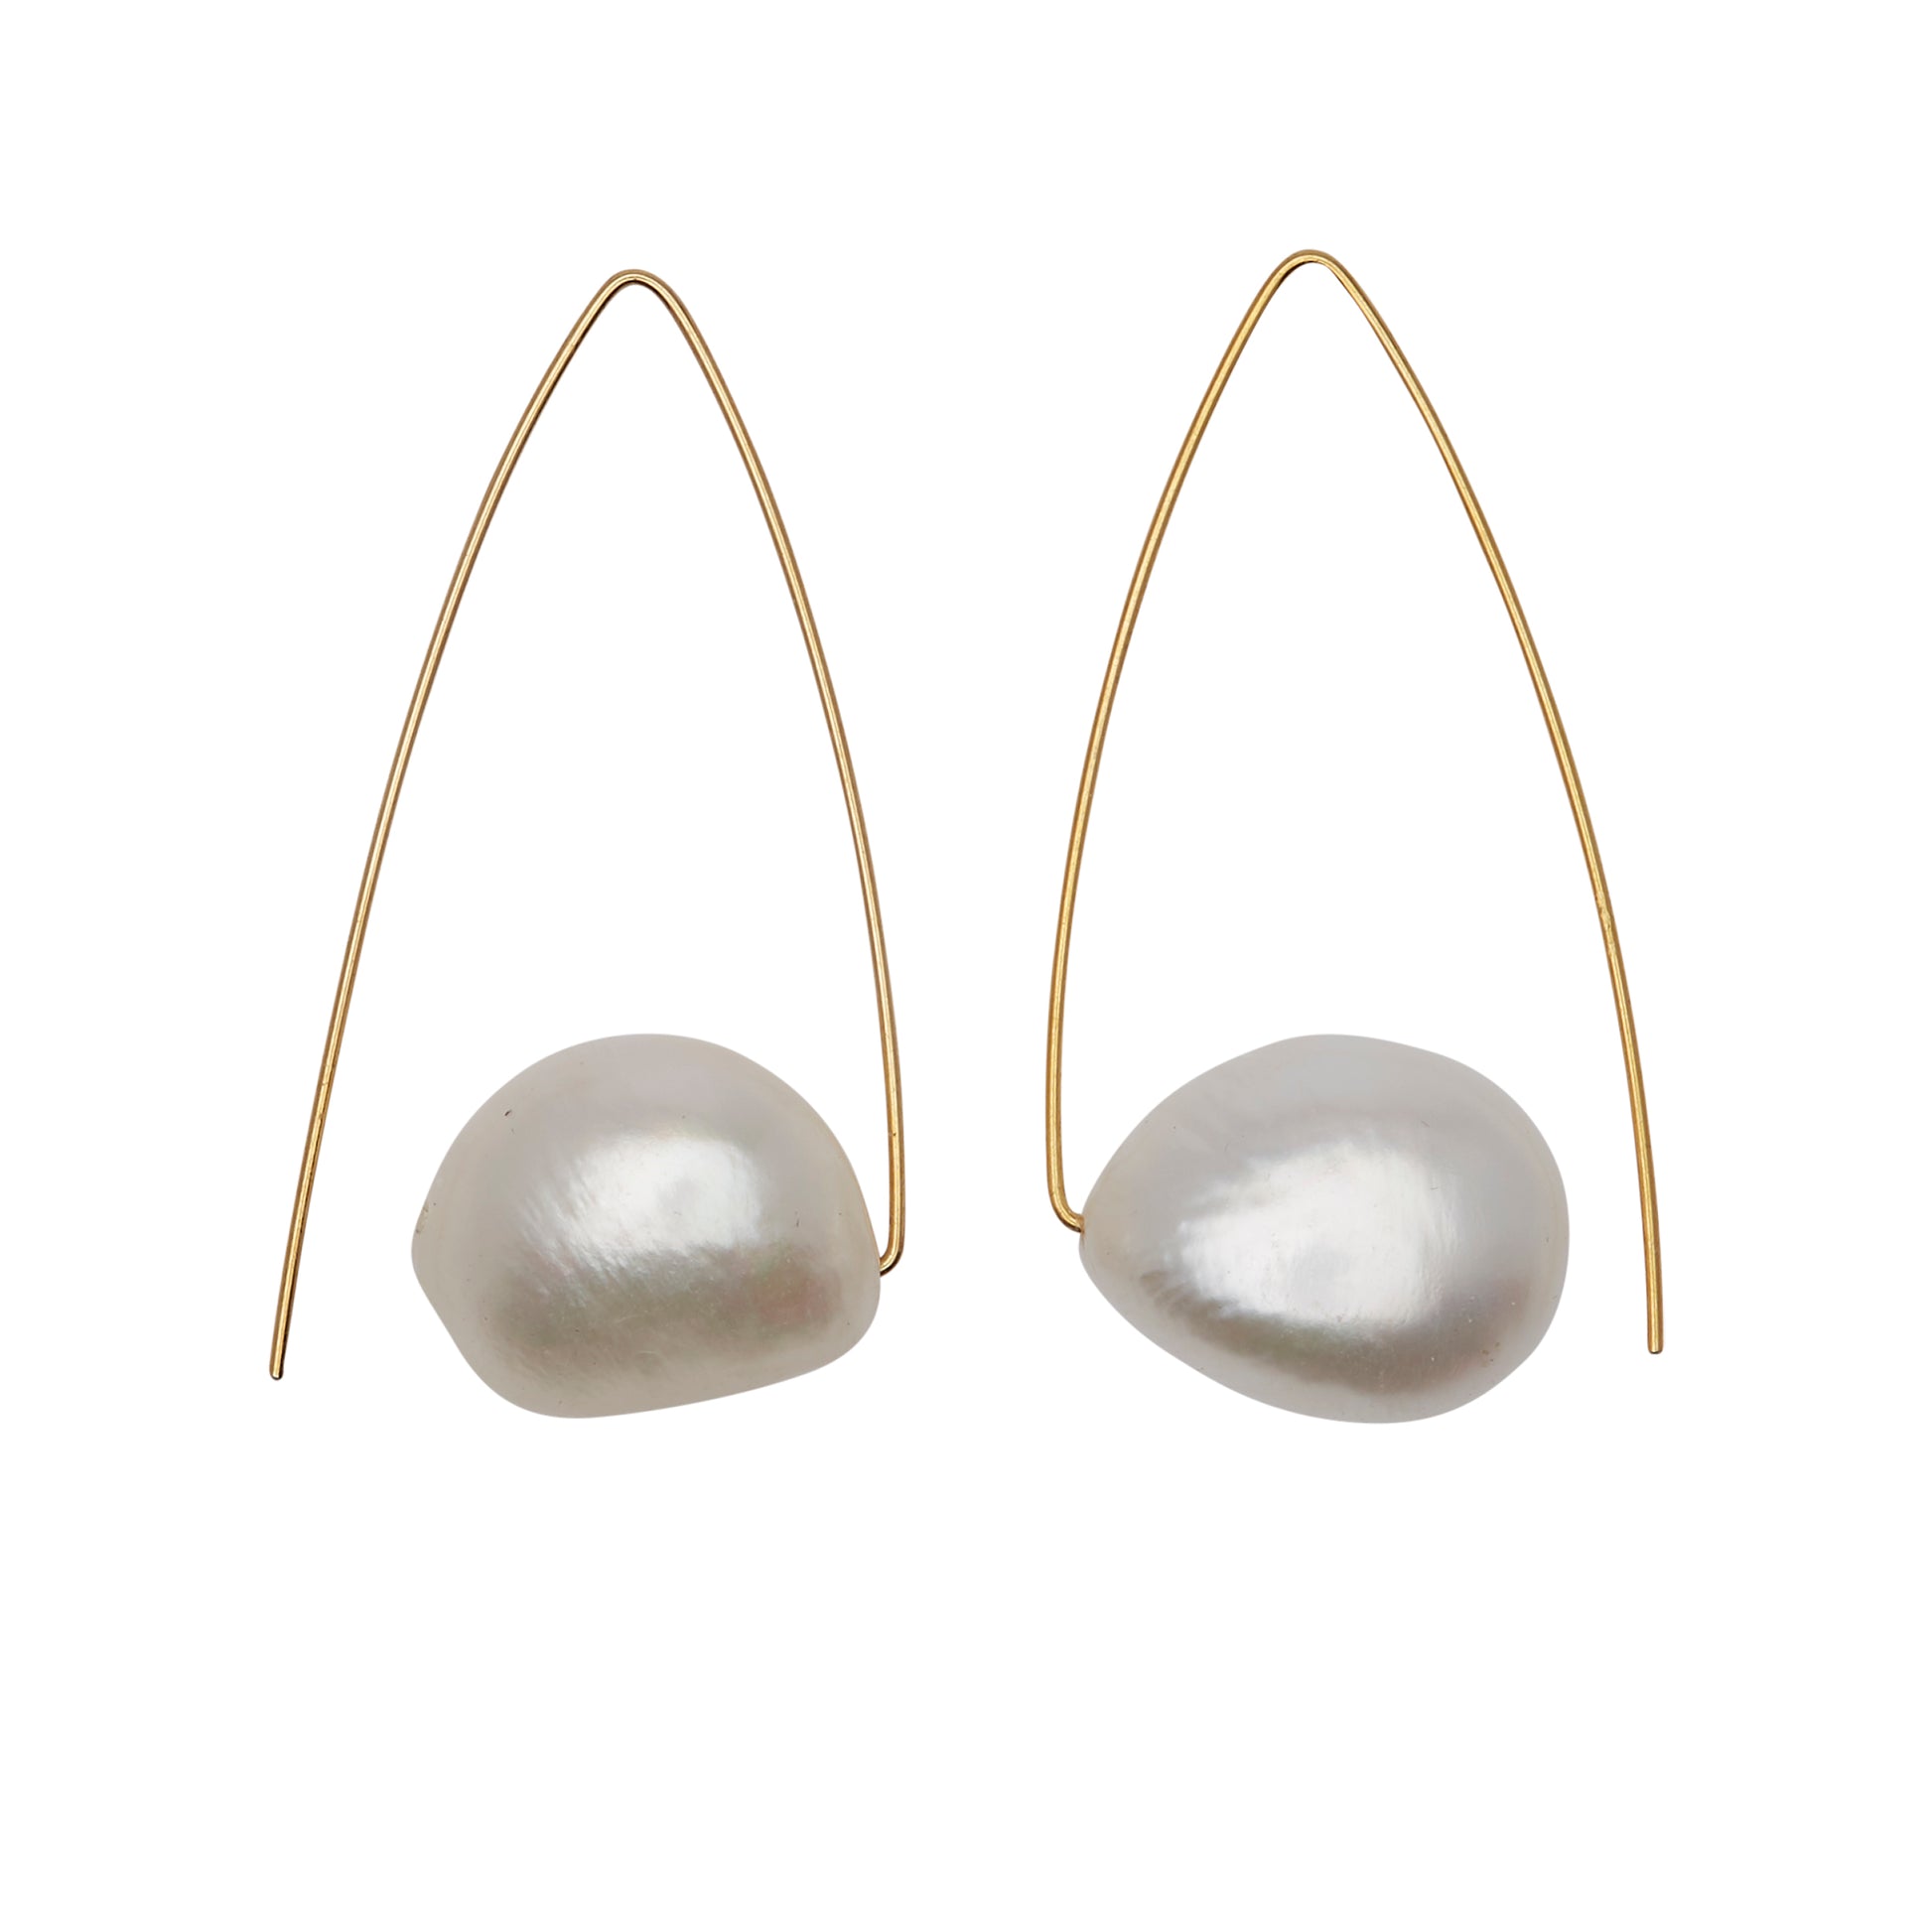 Long Triangle Earrings with White Fresh Water Baroque Pearl Drop